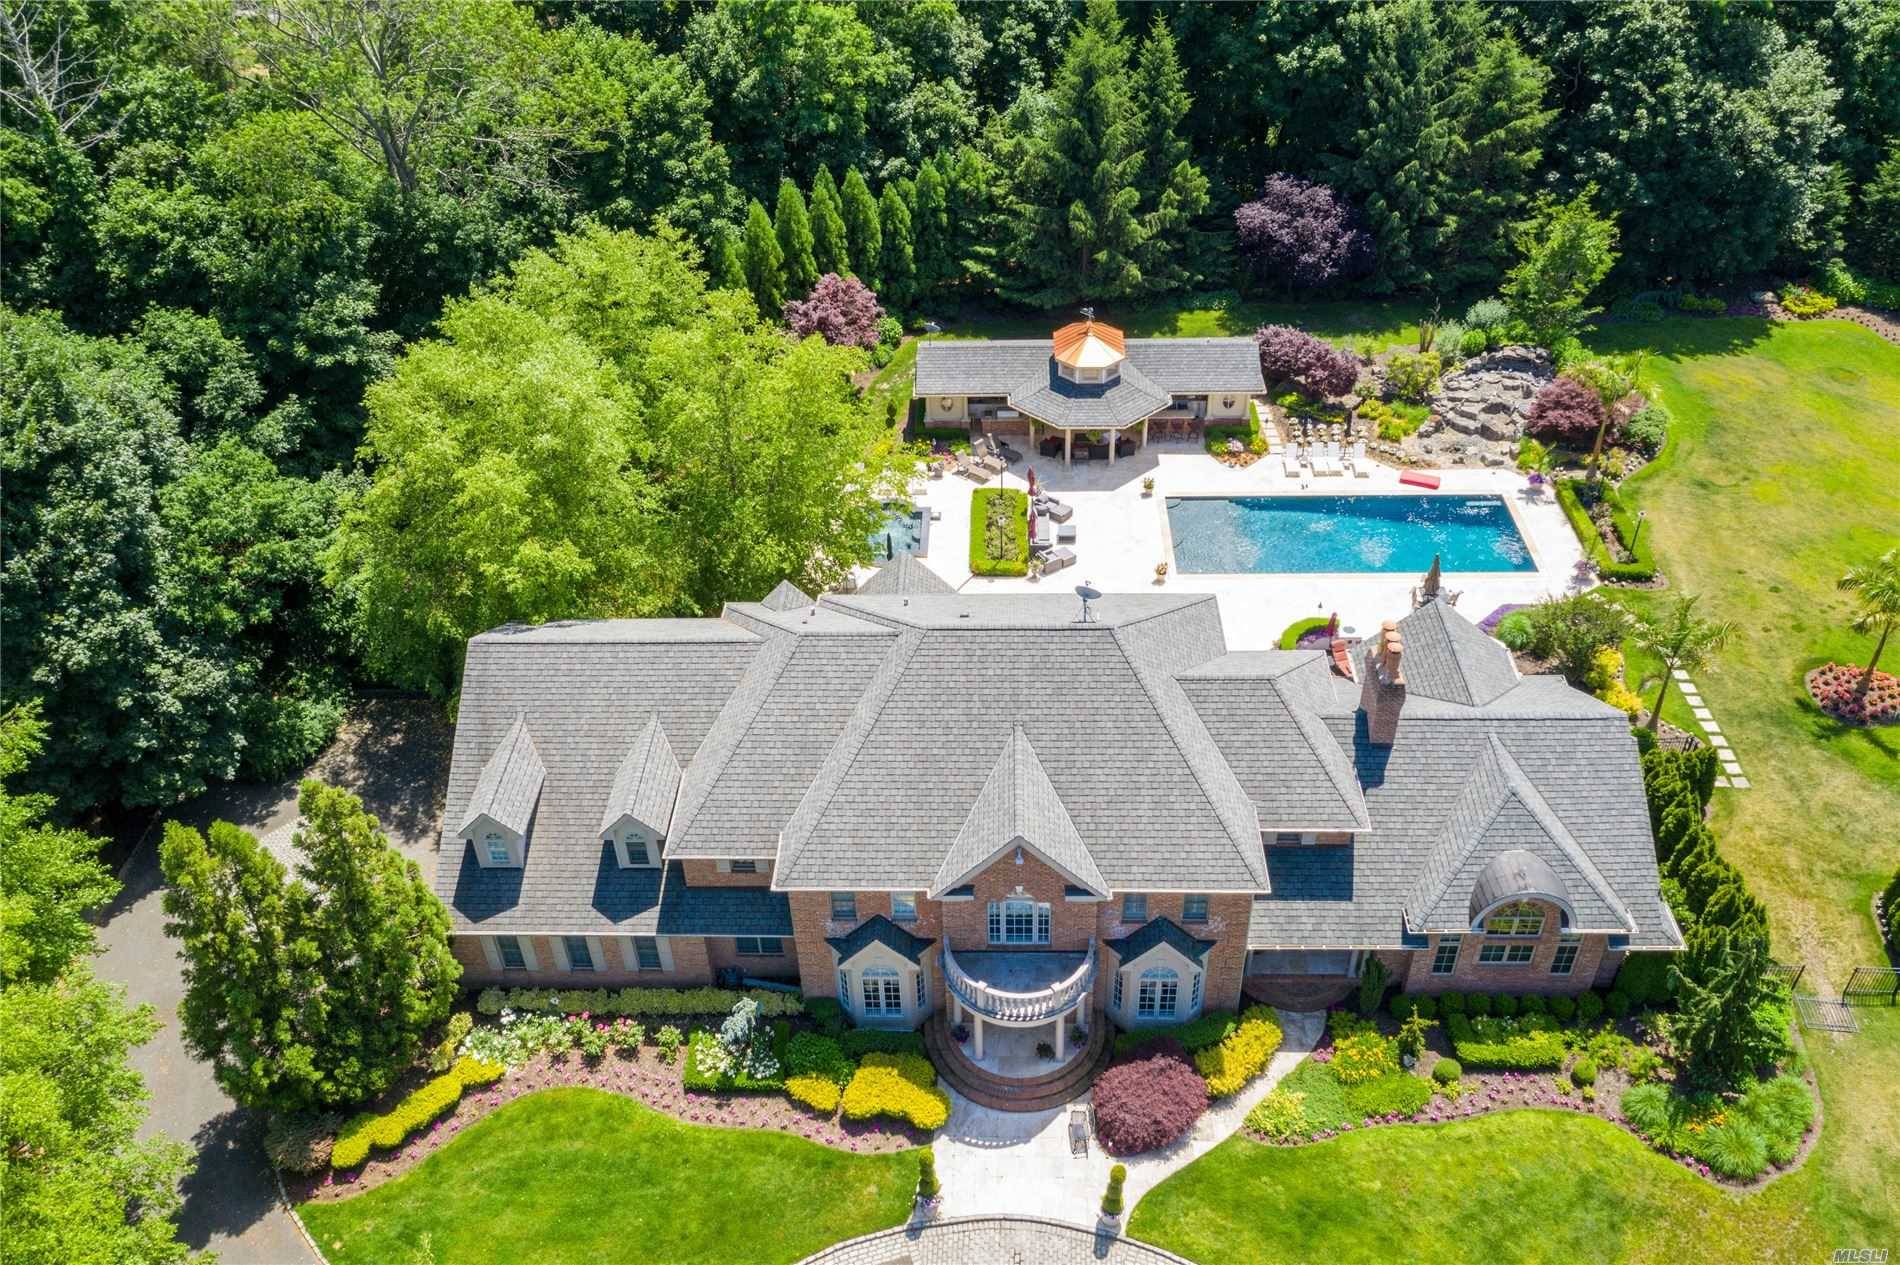 Experience the very best of what a new estate has to offer on Long Island's North Shore.